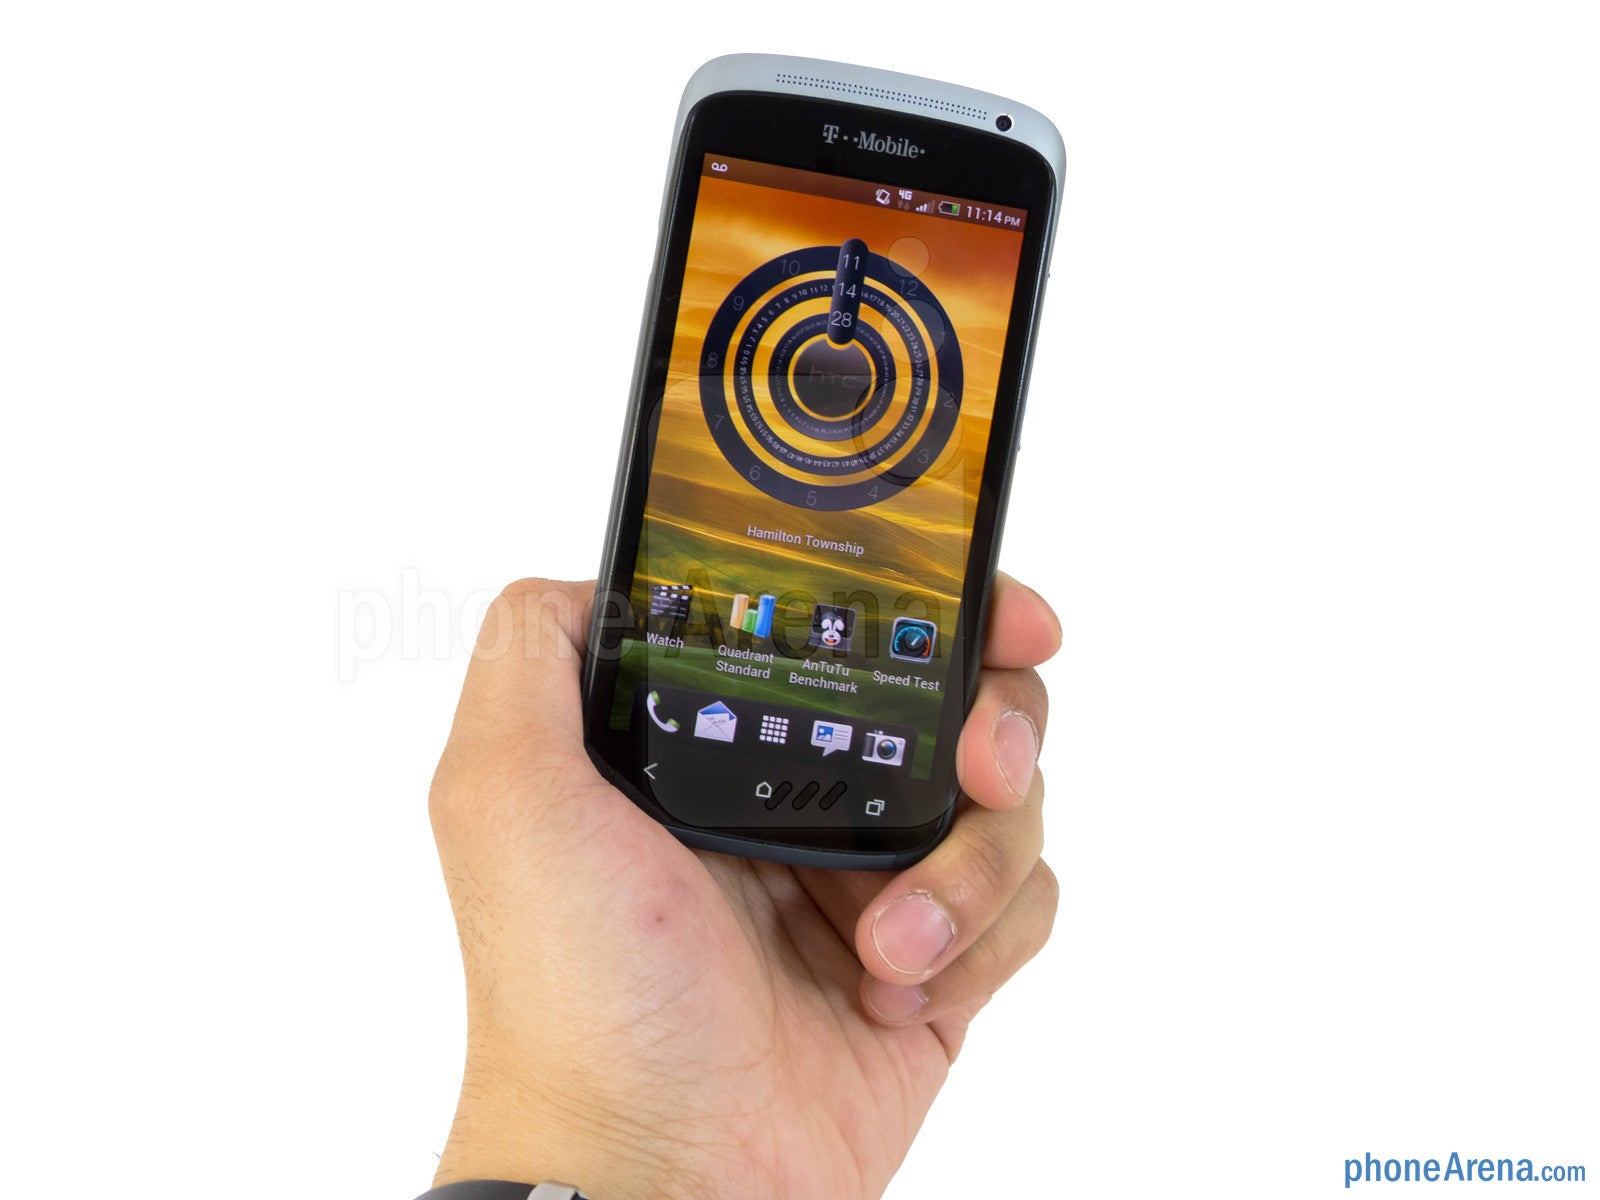 Review: HTC One S